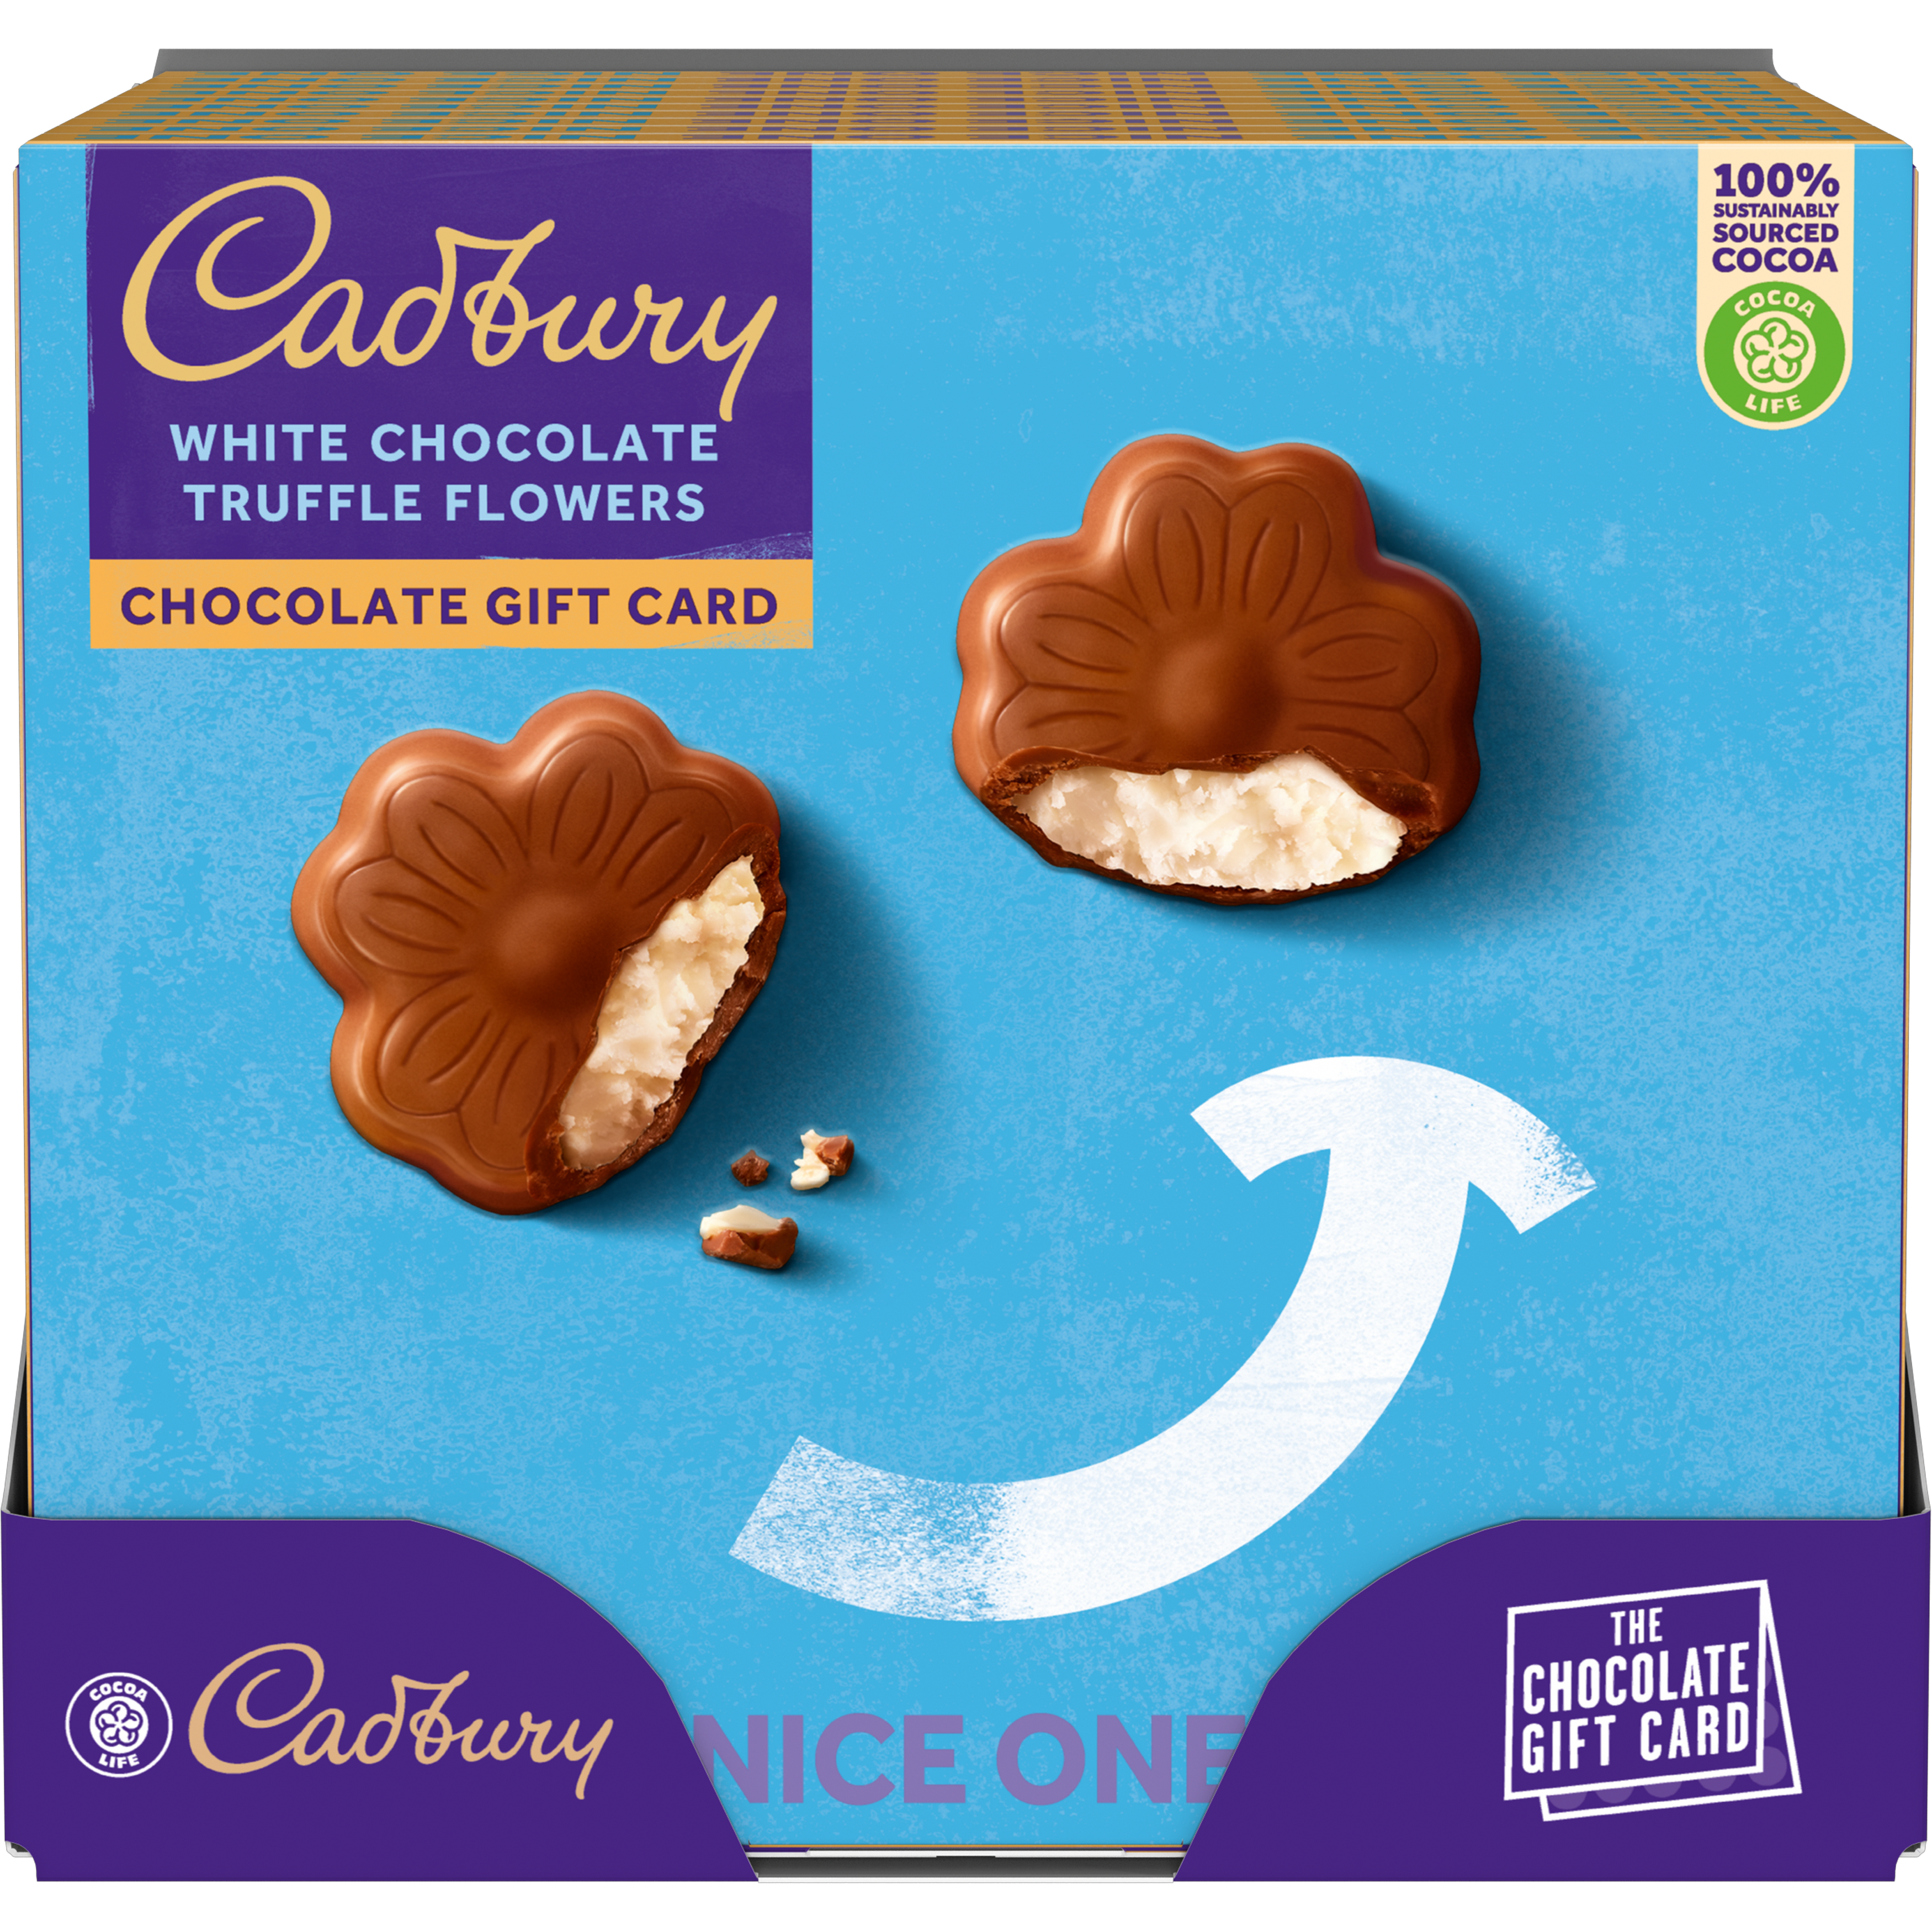 Cadbury launches brand-new gifting concept